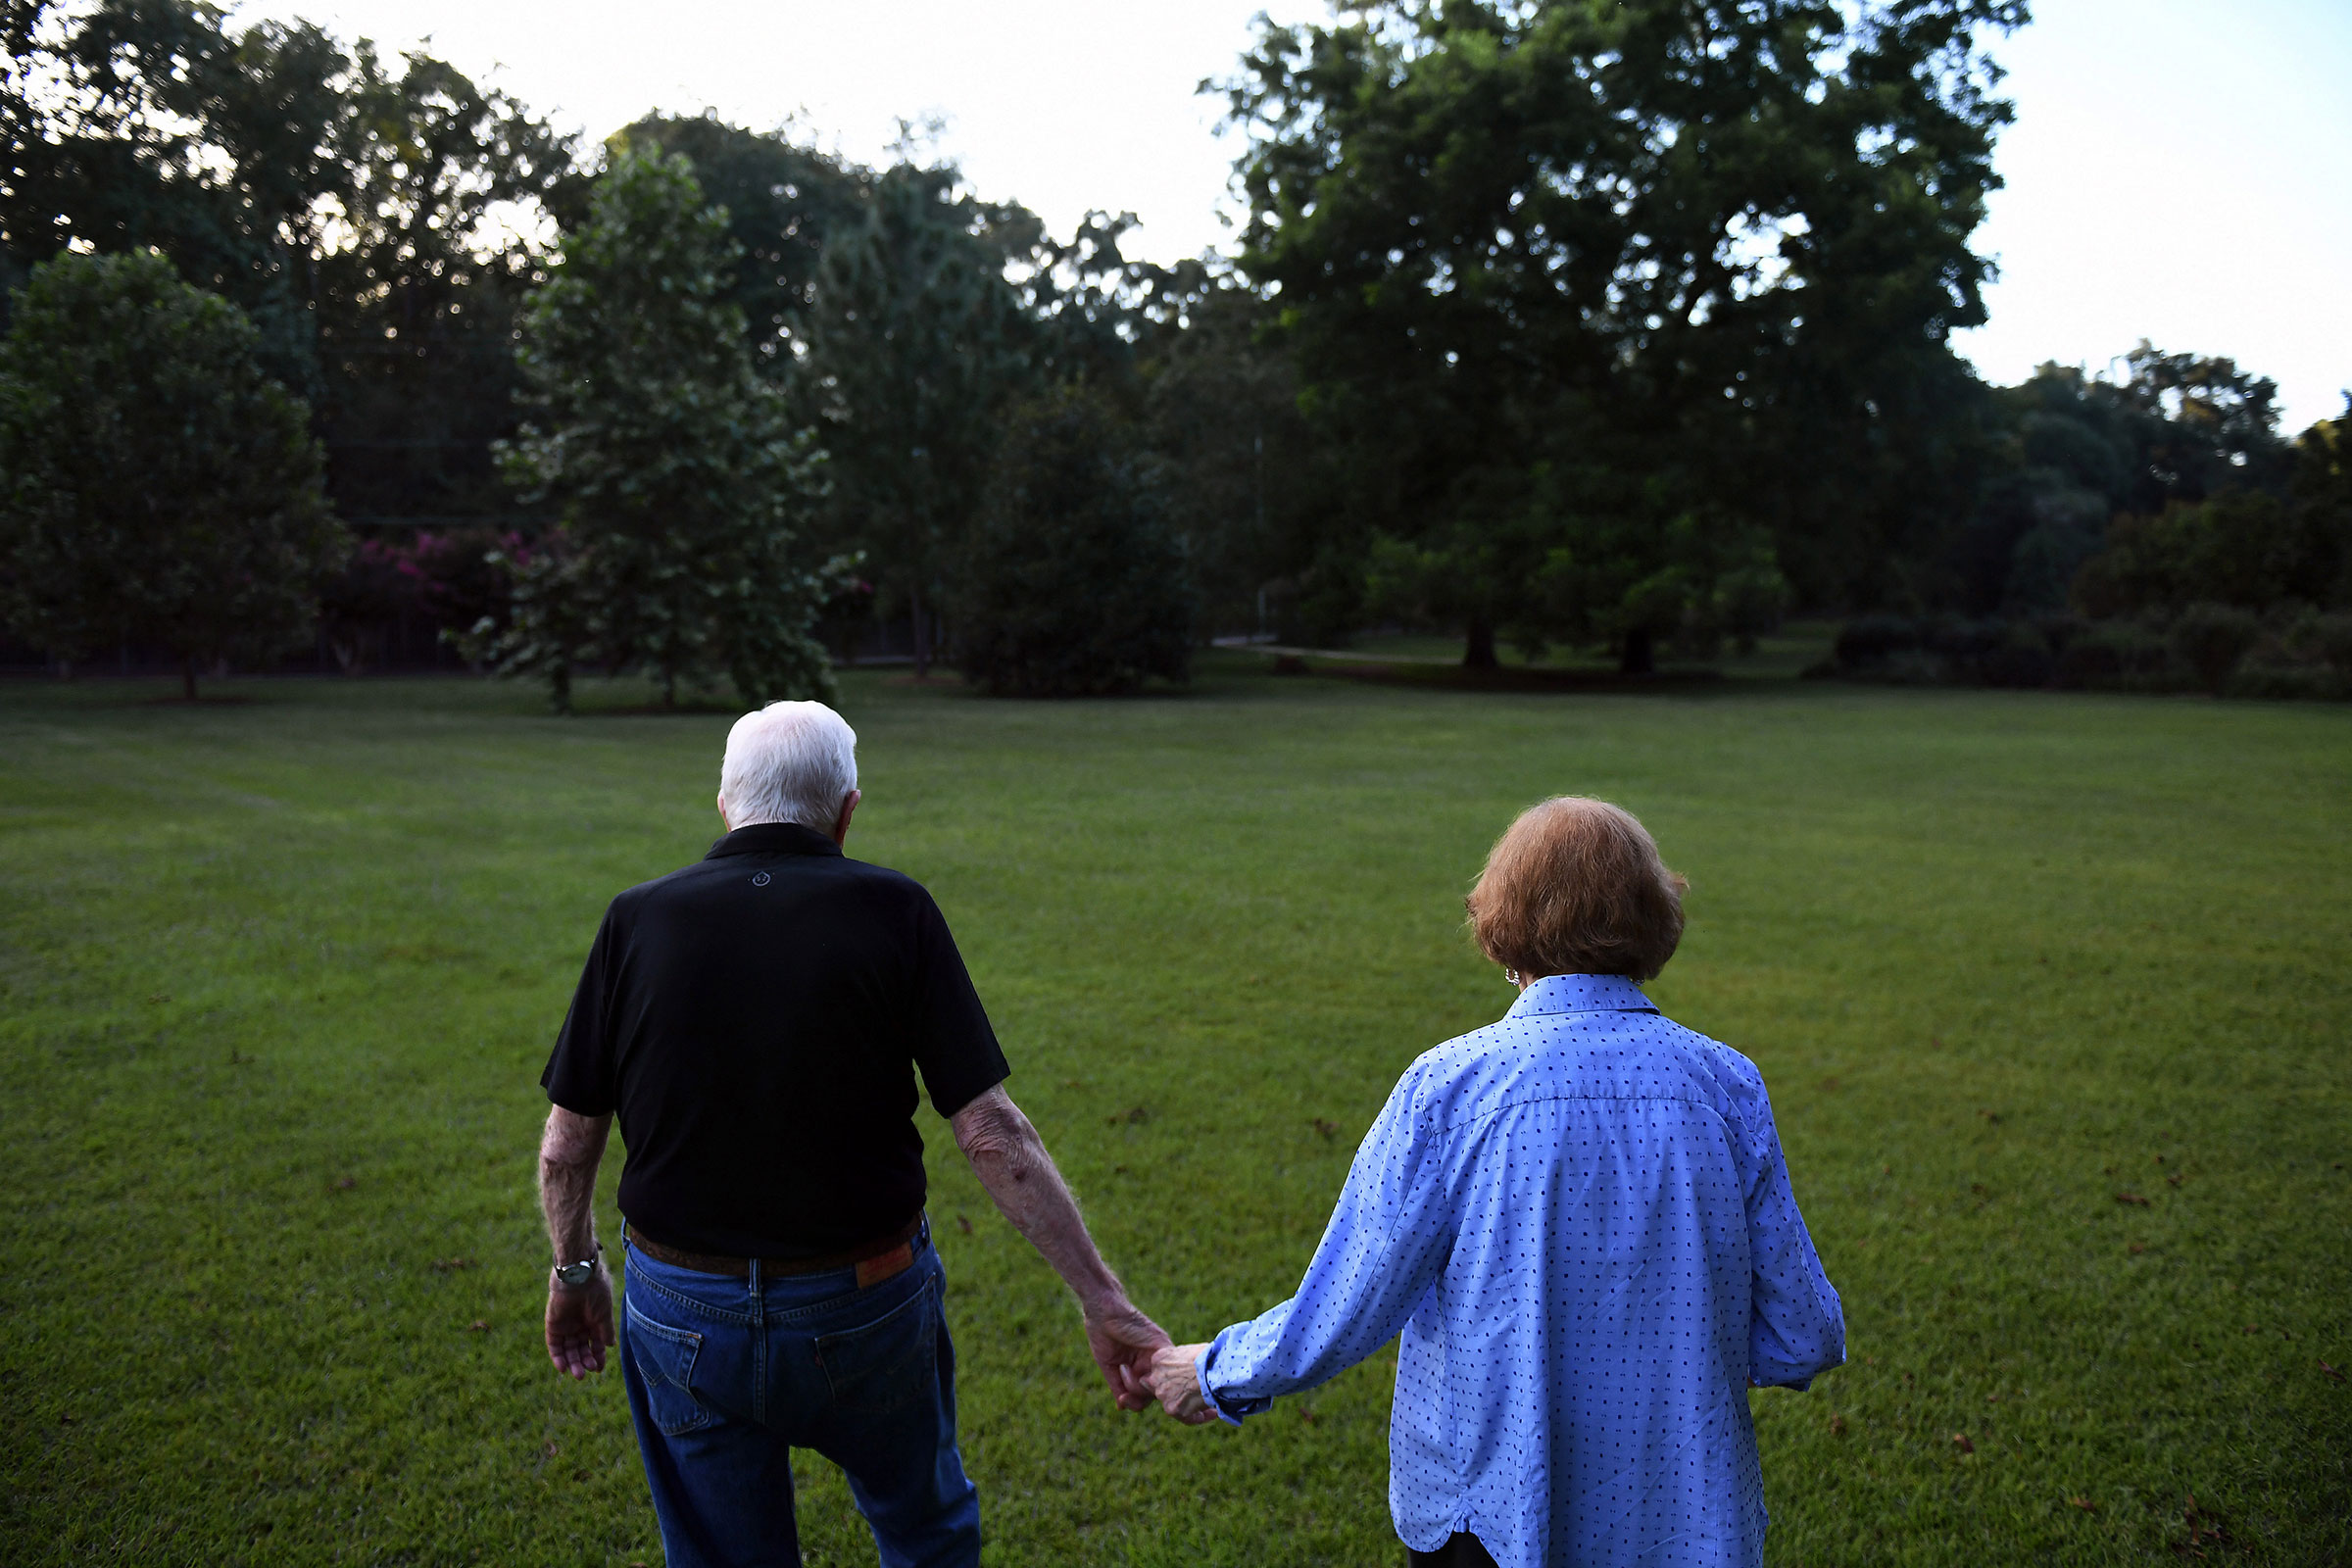 Former President Jimmy Carter walks with his wife, former First Lady, Rosalynn Carter towards their home following dinner at a friend's home in Plains, GA, on Aug. 4, 2018. Born in Plains, GA, President Carter stayed in the town following his presidency.